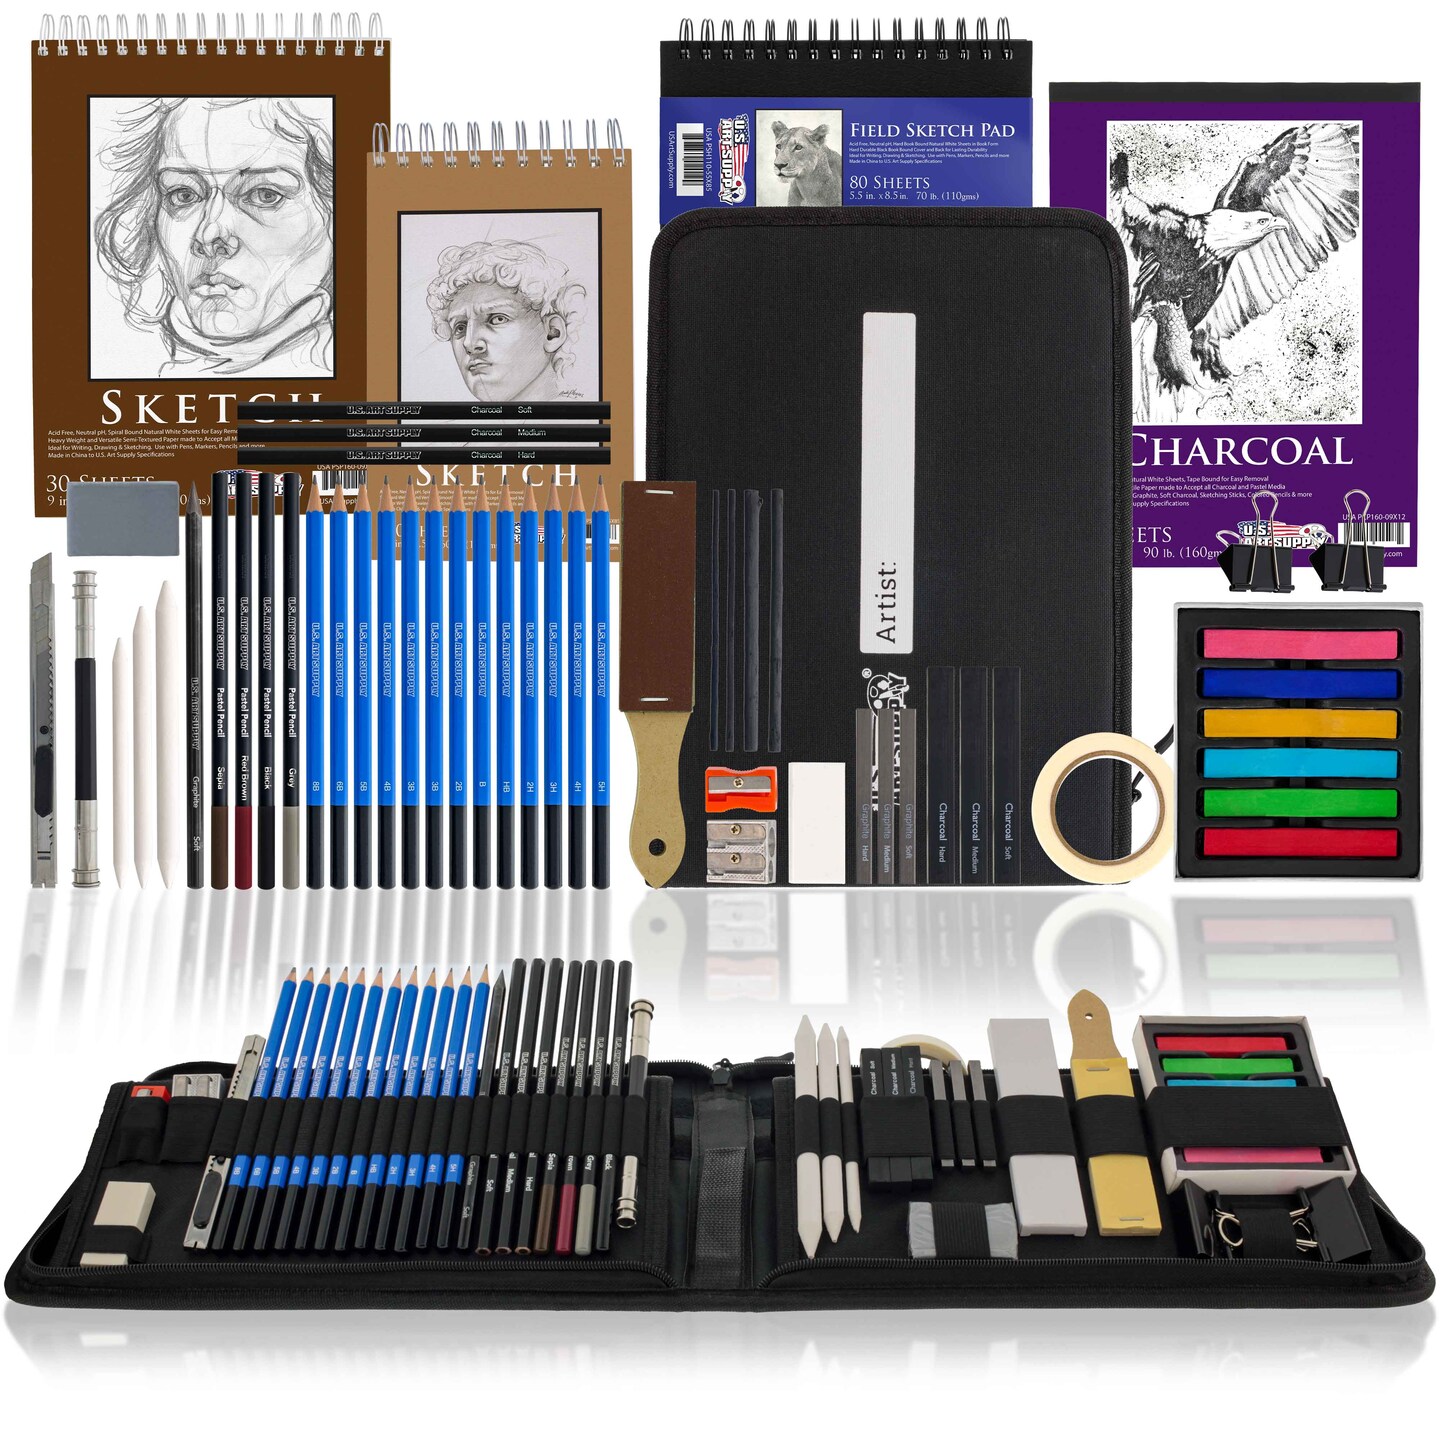 Sketch Board - Technical Drawing - Drawing Tools & Illustration